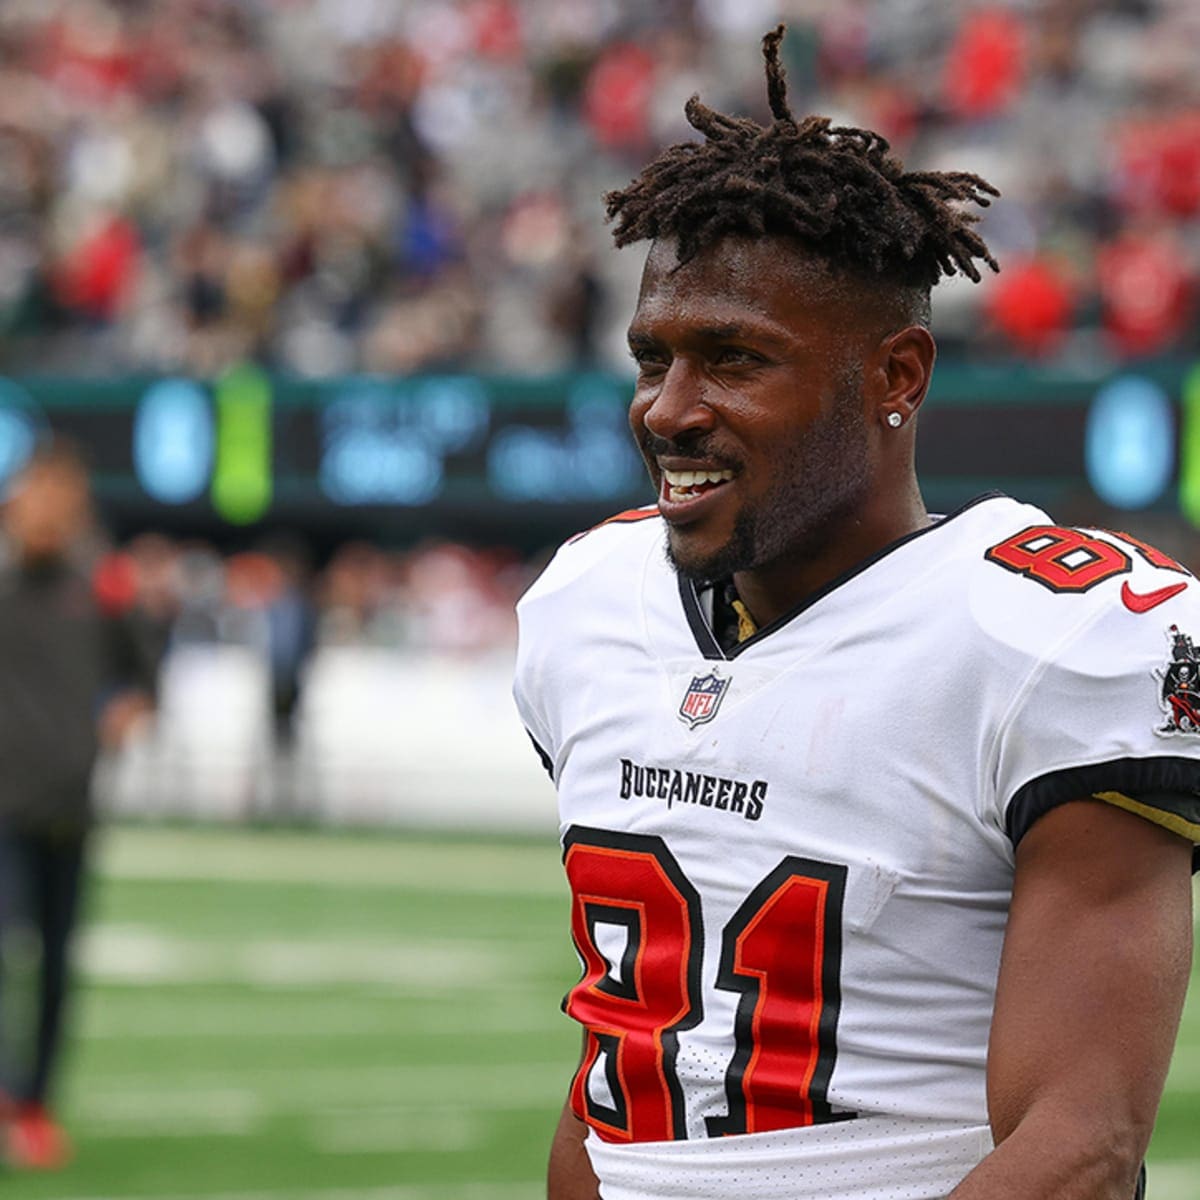 ”antonio-brown-addresses-important-issues-about-mental-health”